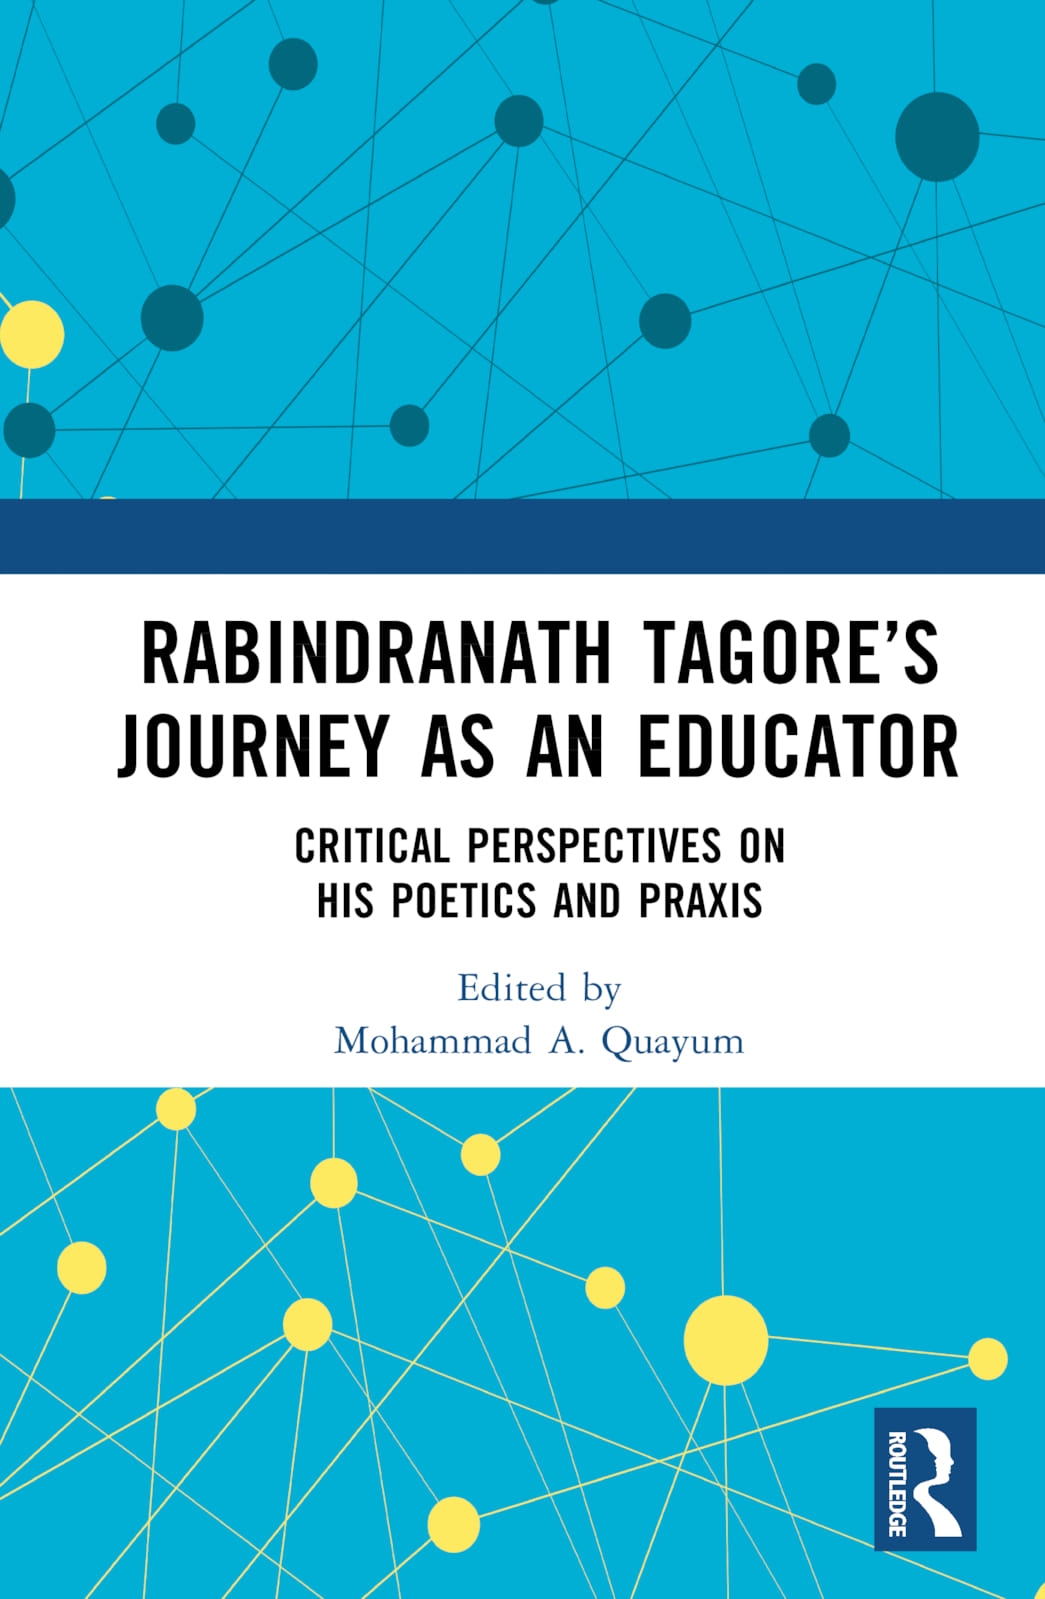 Rabindranath Tagore’s Journey as an Educator: Critical Perspectives on His Poetics and Praxis